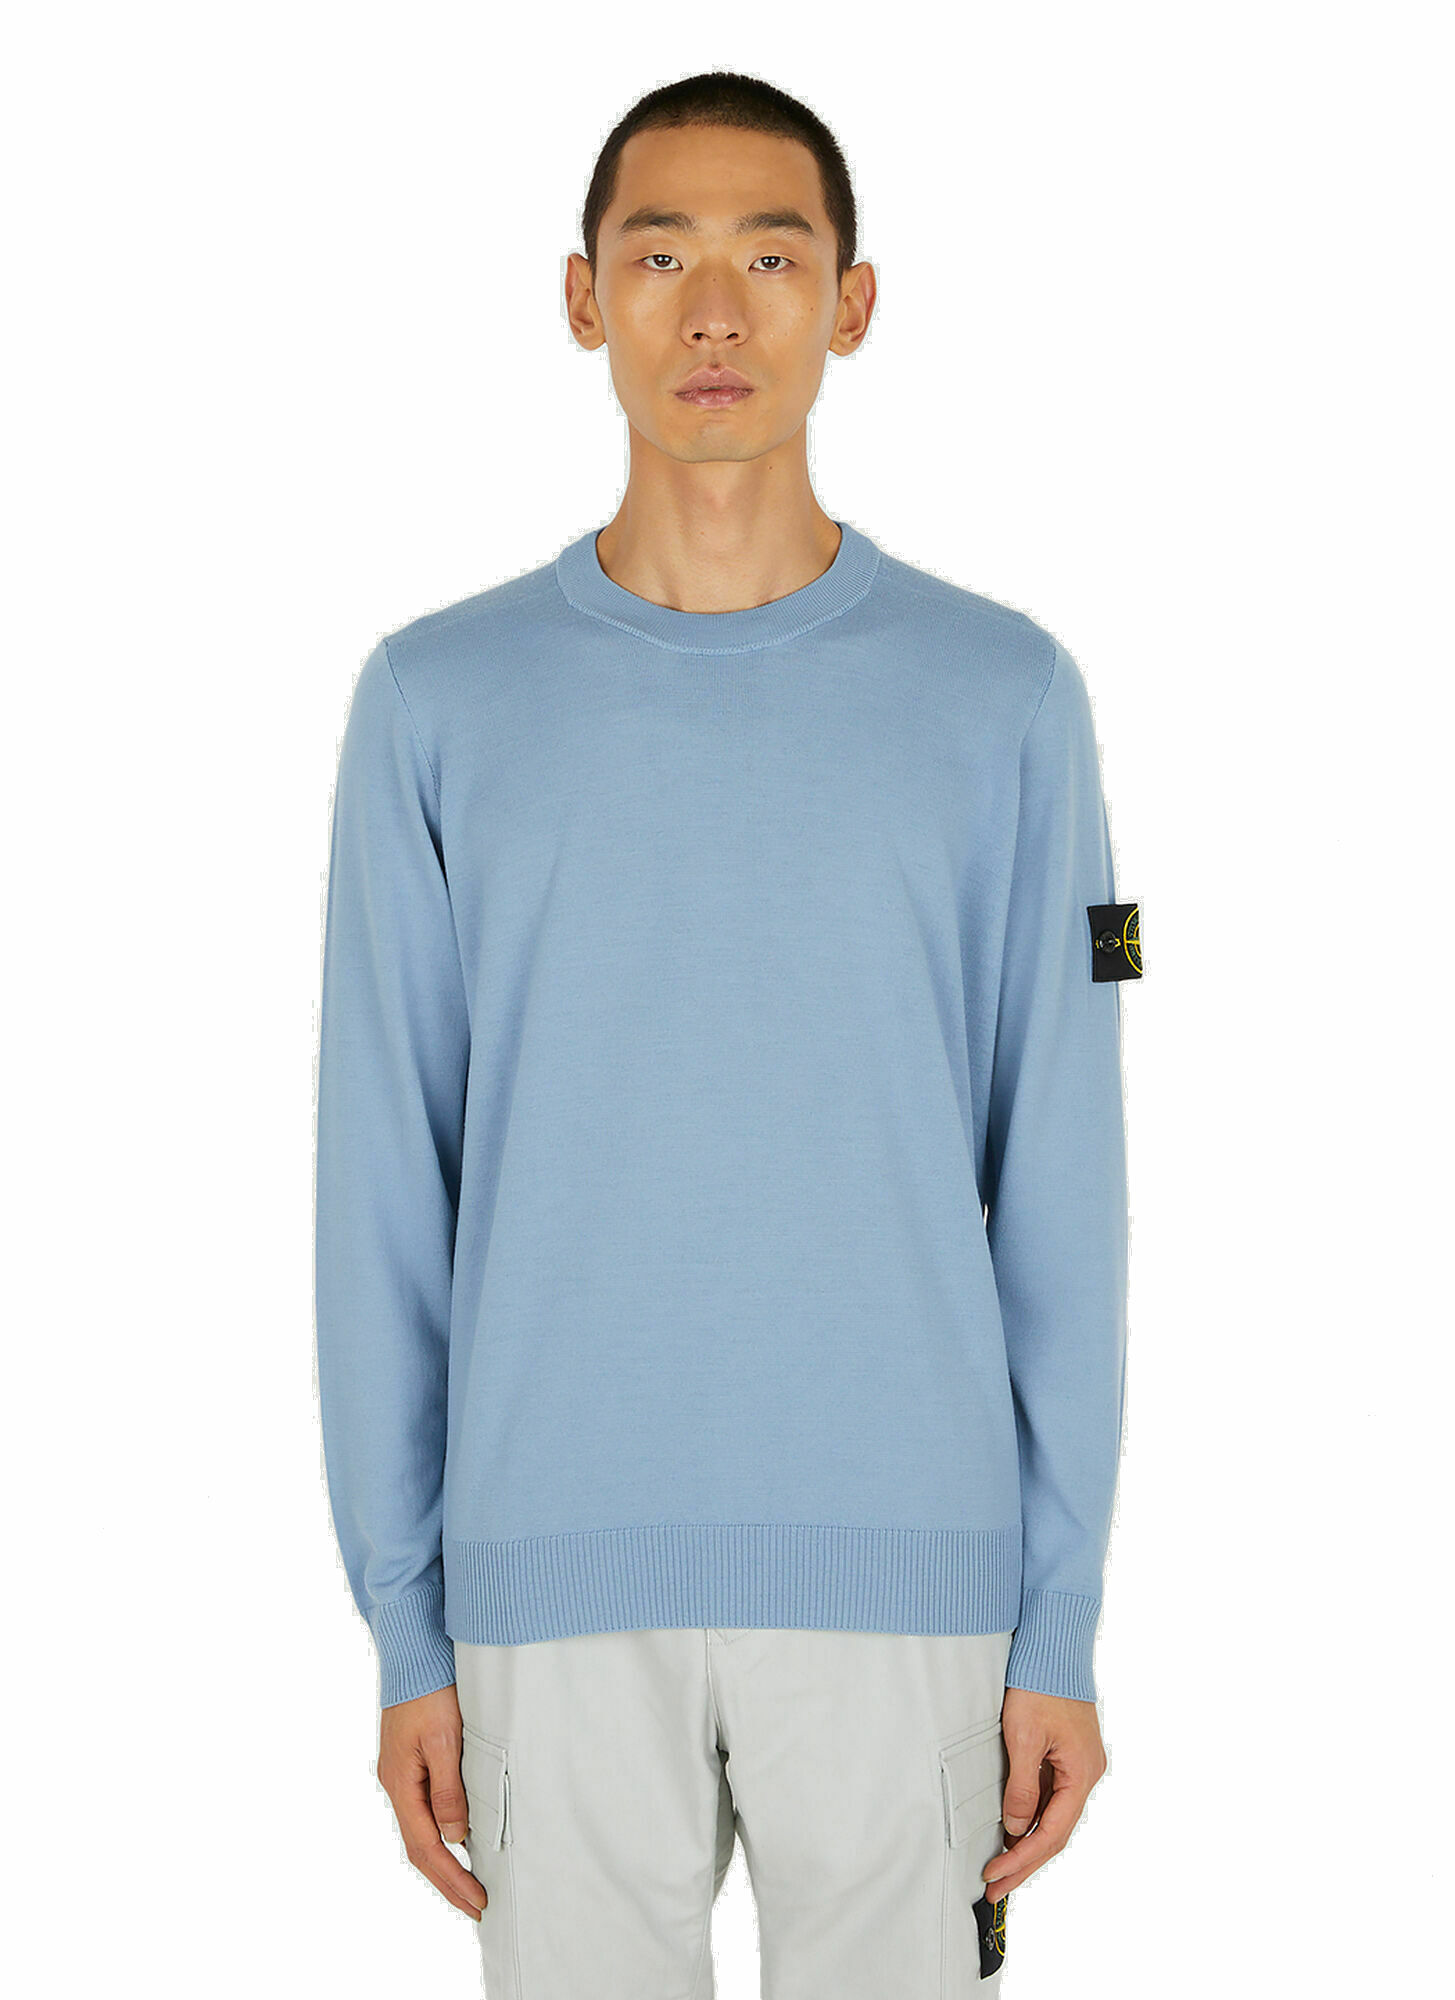 Photo: Compass Patch Sweater in Blue